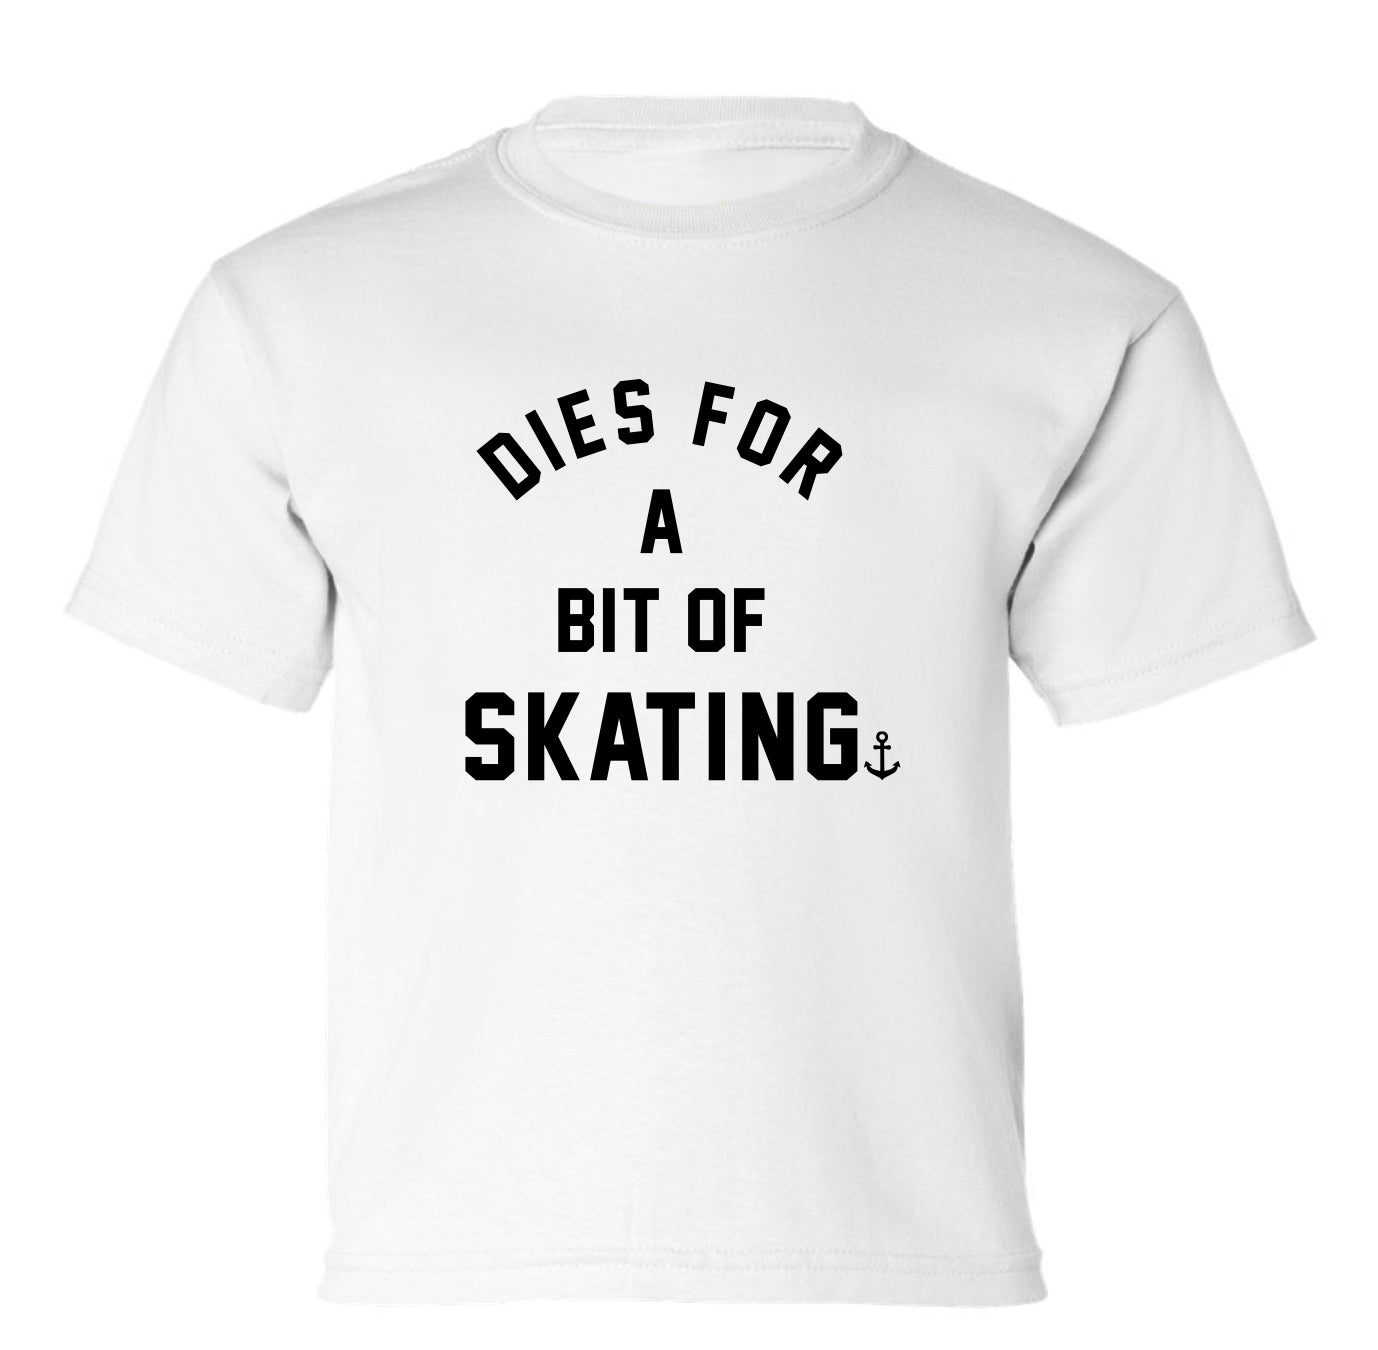 "Dies For A Bit Of Skating" Toddler/Youth T-Shirt